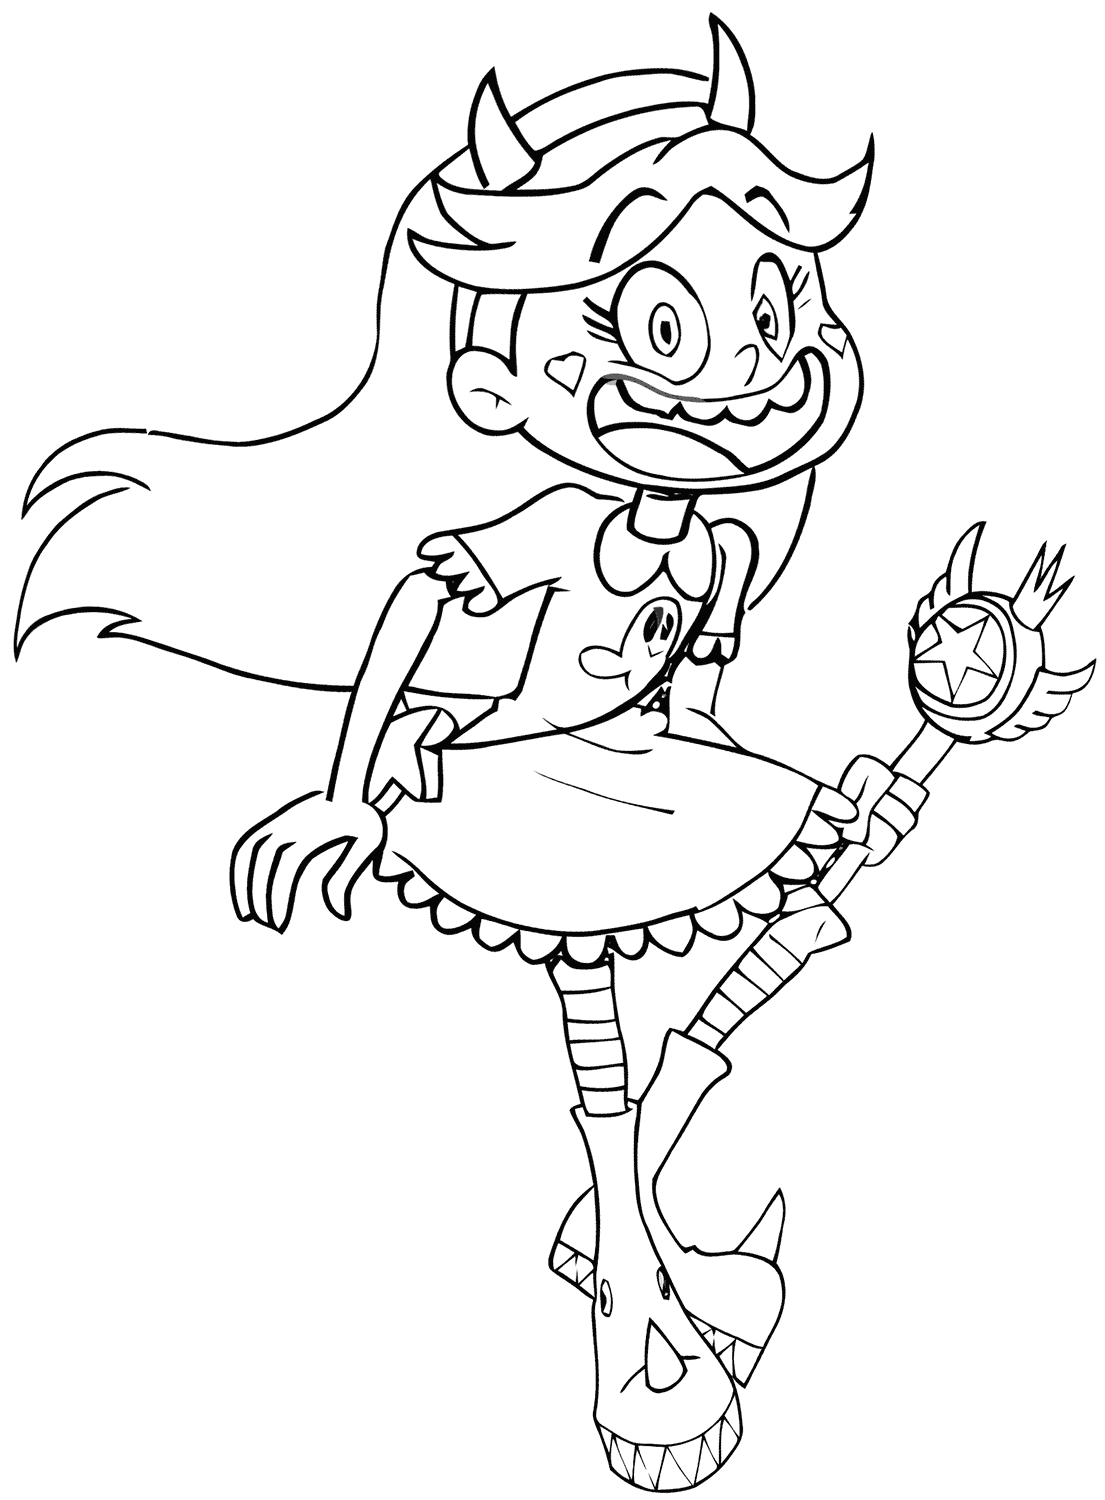 Star Butterfly Smiling Coloring Pages   Coloring Cool